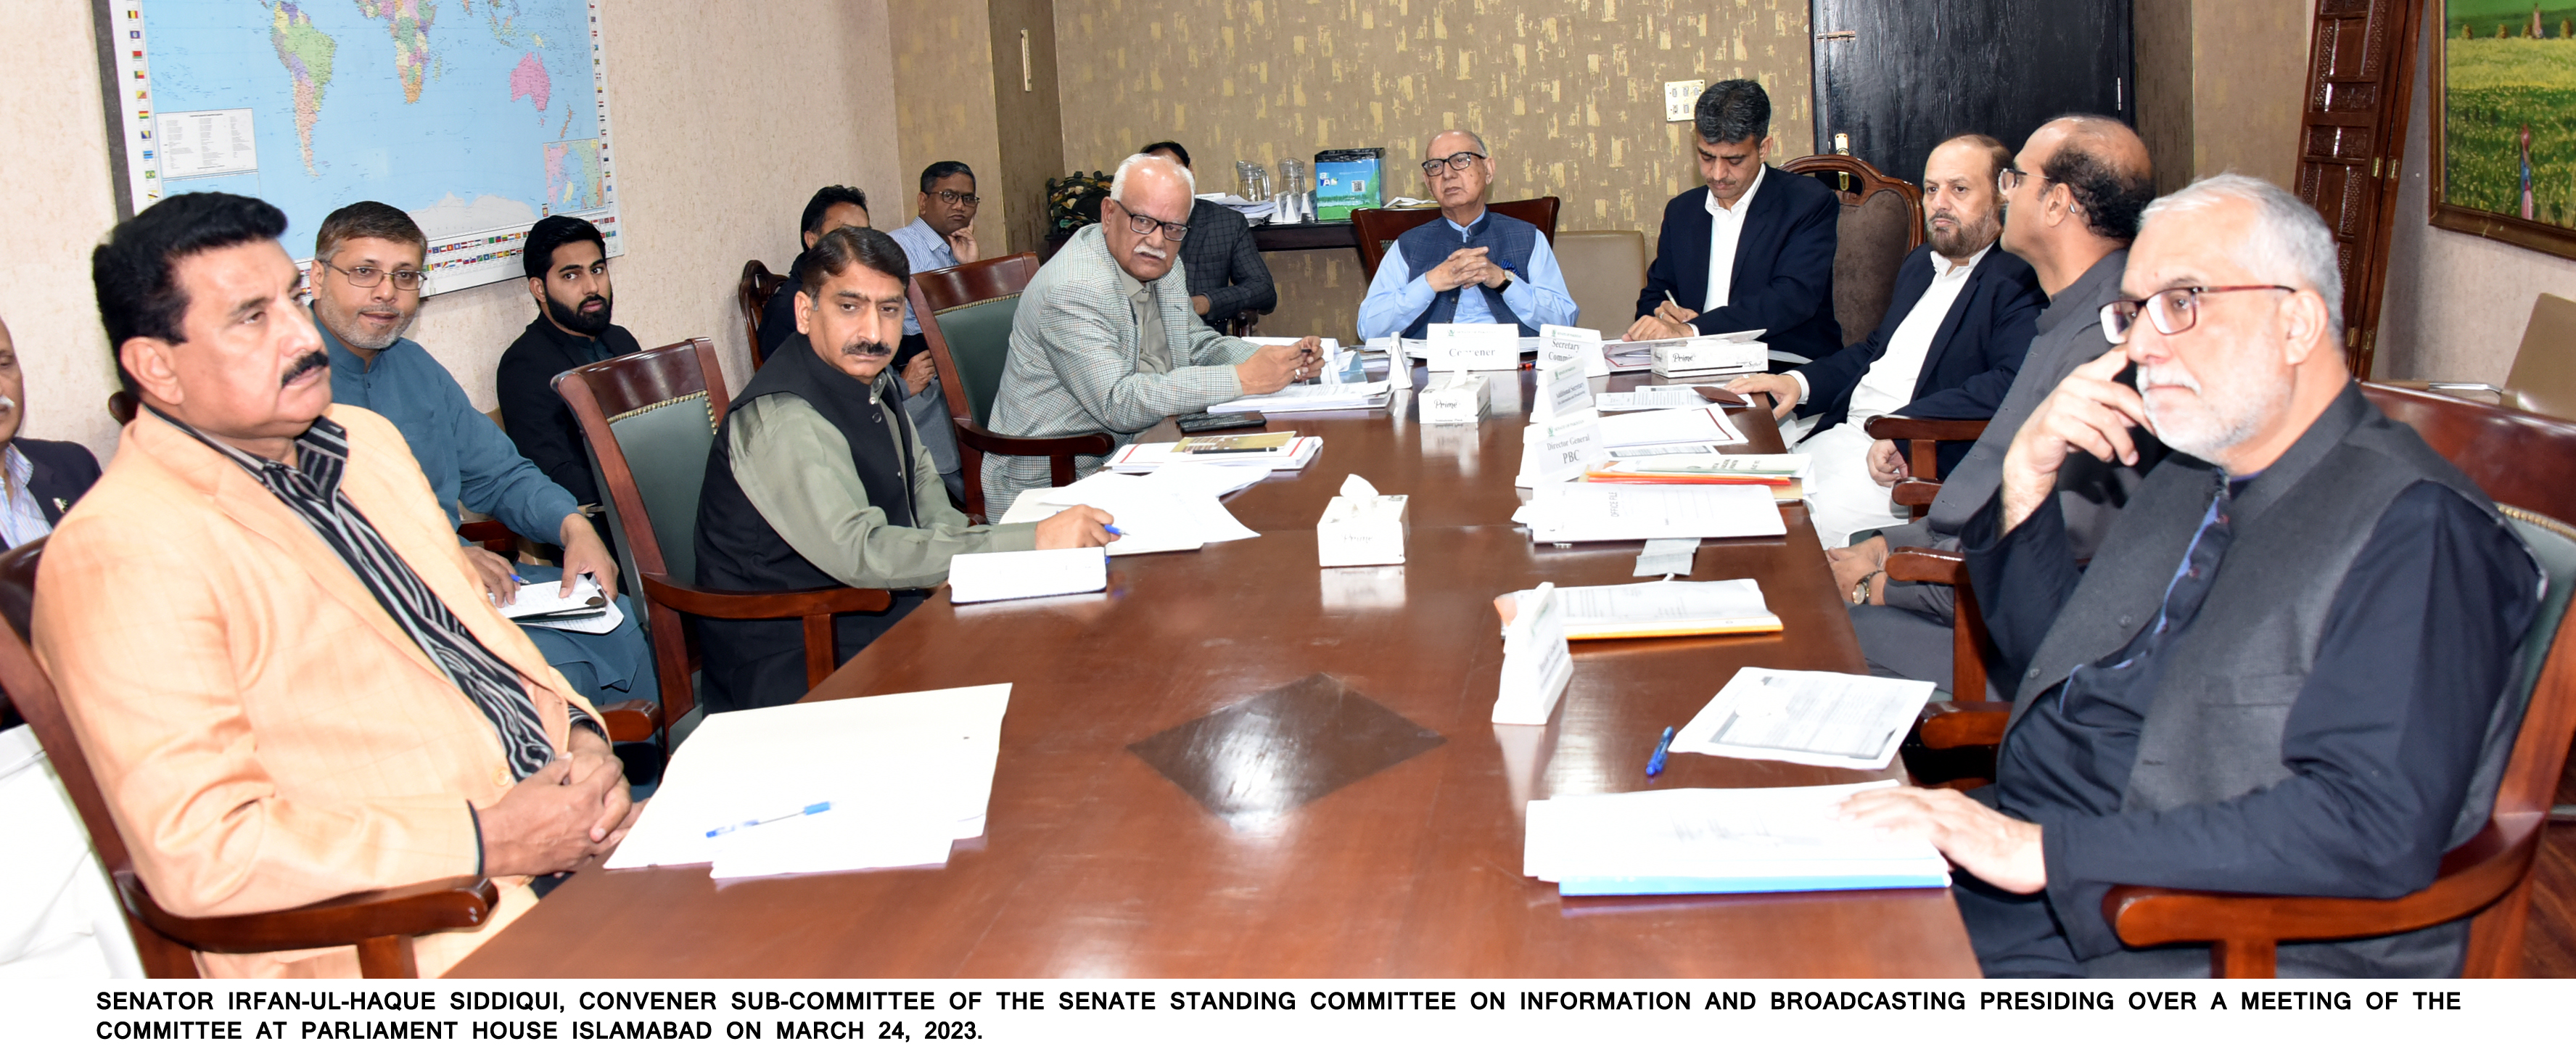 Meeting of Sub-Committee of Senate Standing Committee on Information and Broadcasting held at Parliament House with Senator Irfan ul Haq Siddiqui in Chair.